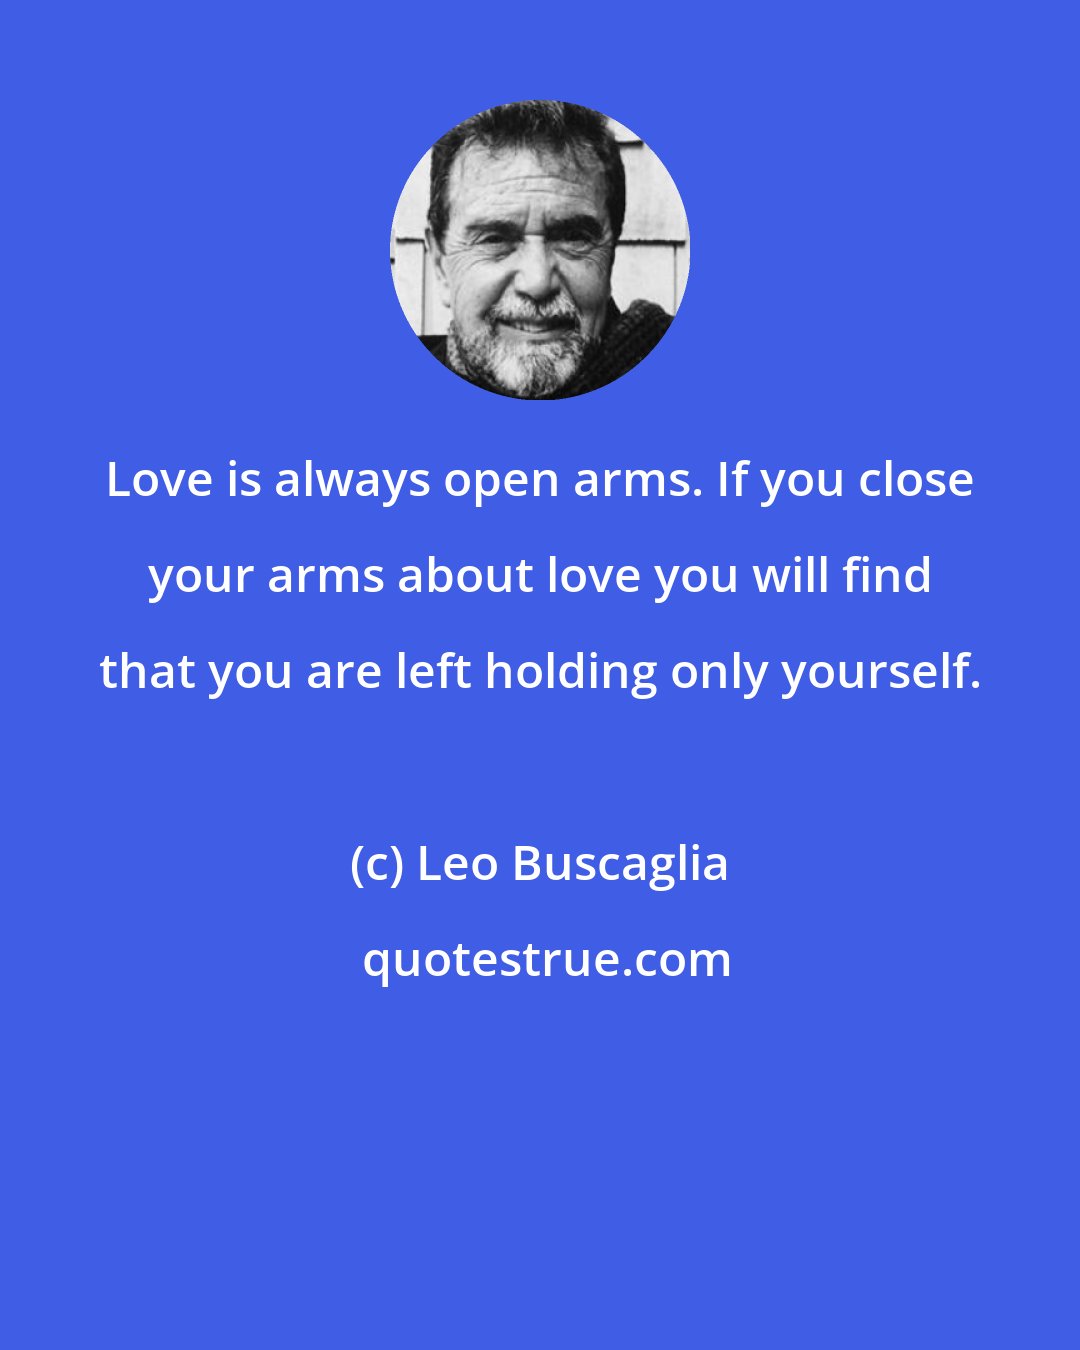 Leo Buscaglia: Love is always open arms. If you close your arms about love you will find that you are left holding only yourself.